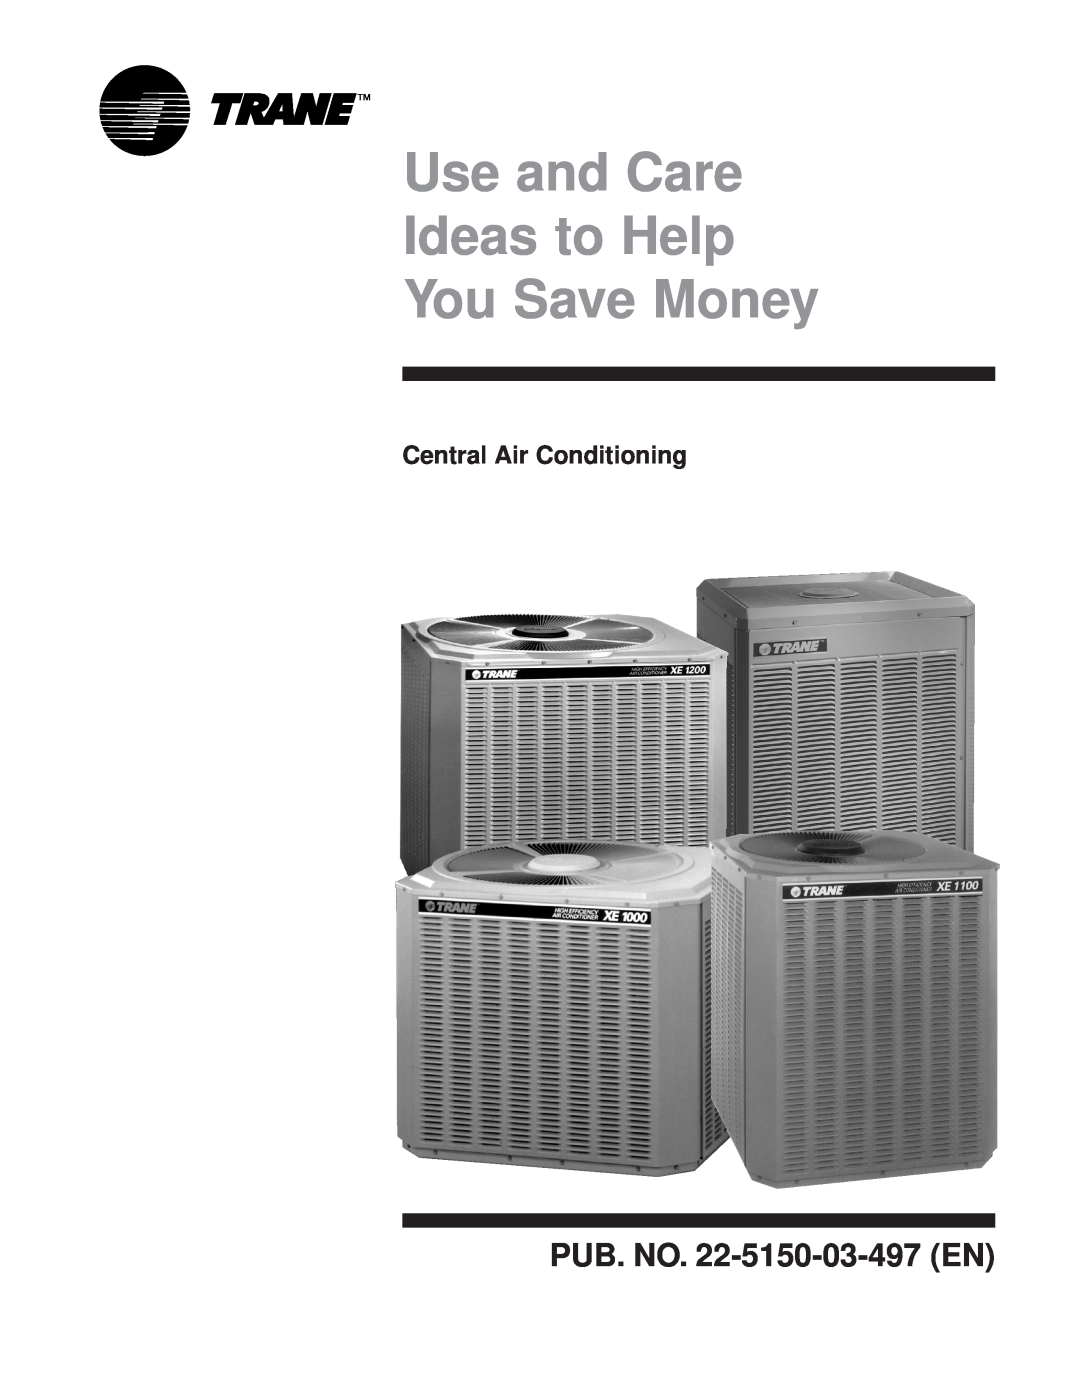 Trane manual Use and Care Ideas to Help You Save Money, PUB. NO. 22-5150-03-497EN, Central Air Conditioning 